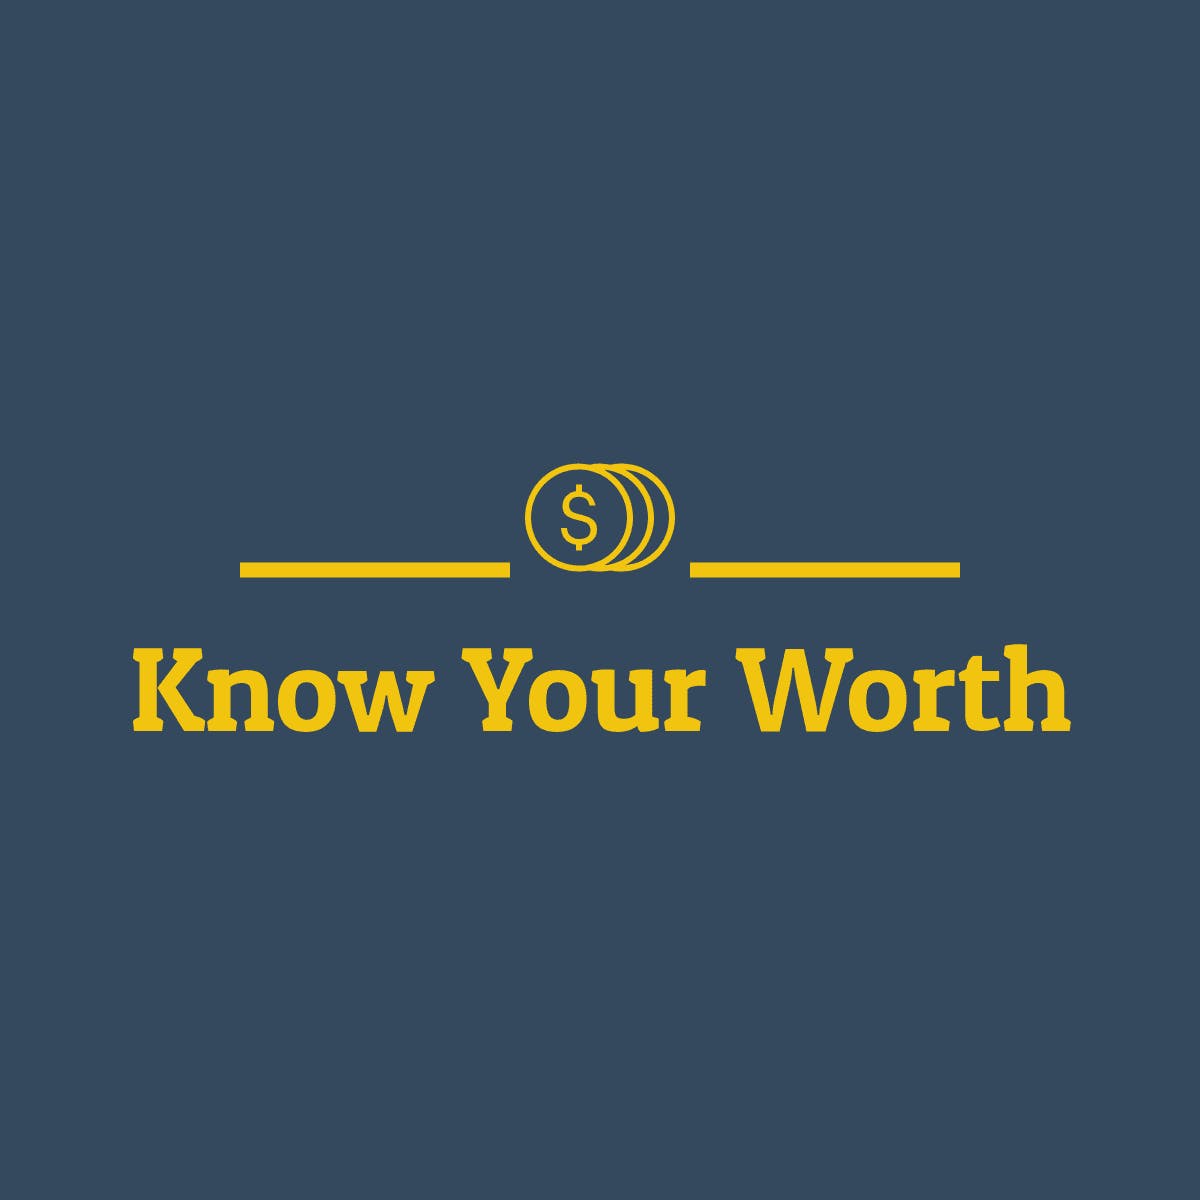 Know Your Worth media 1